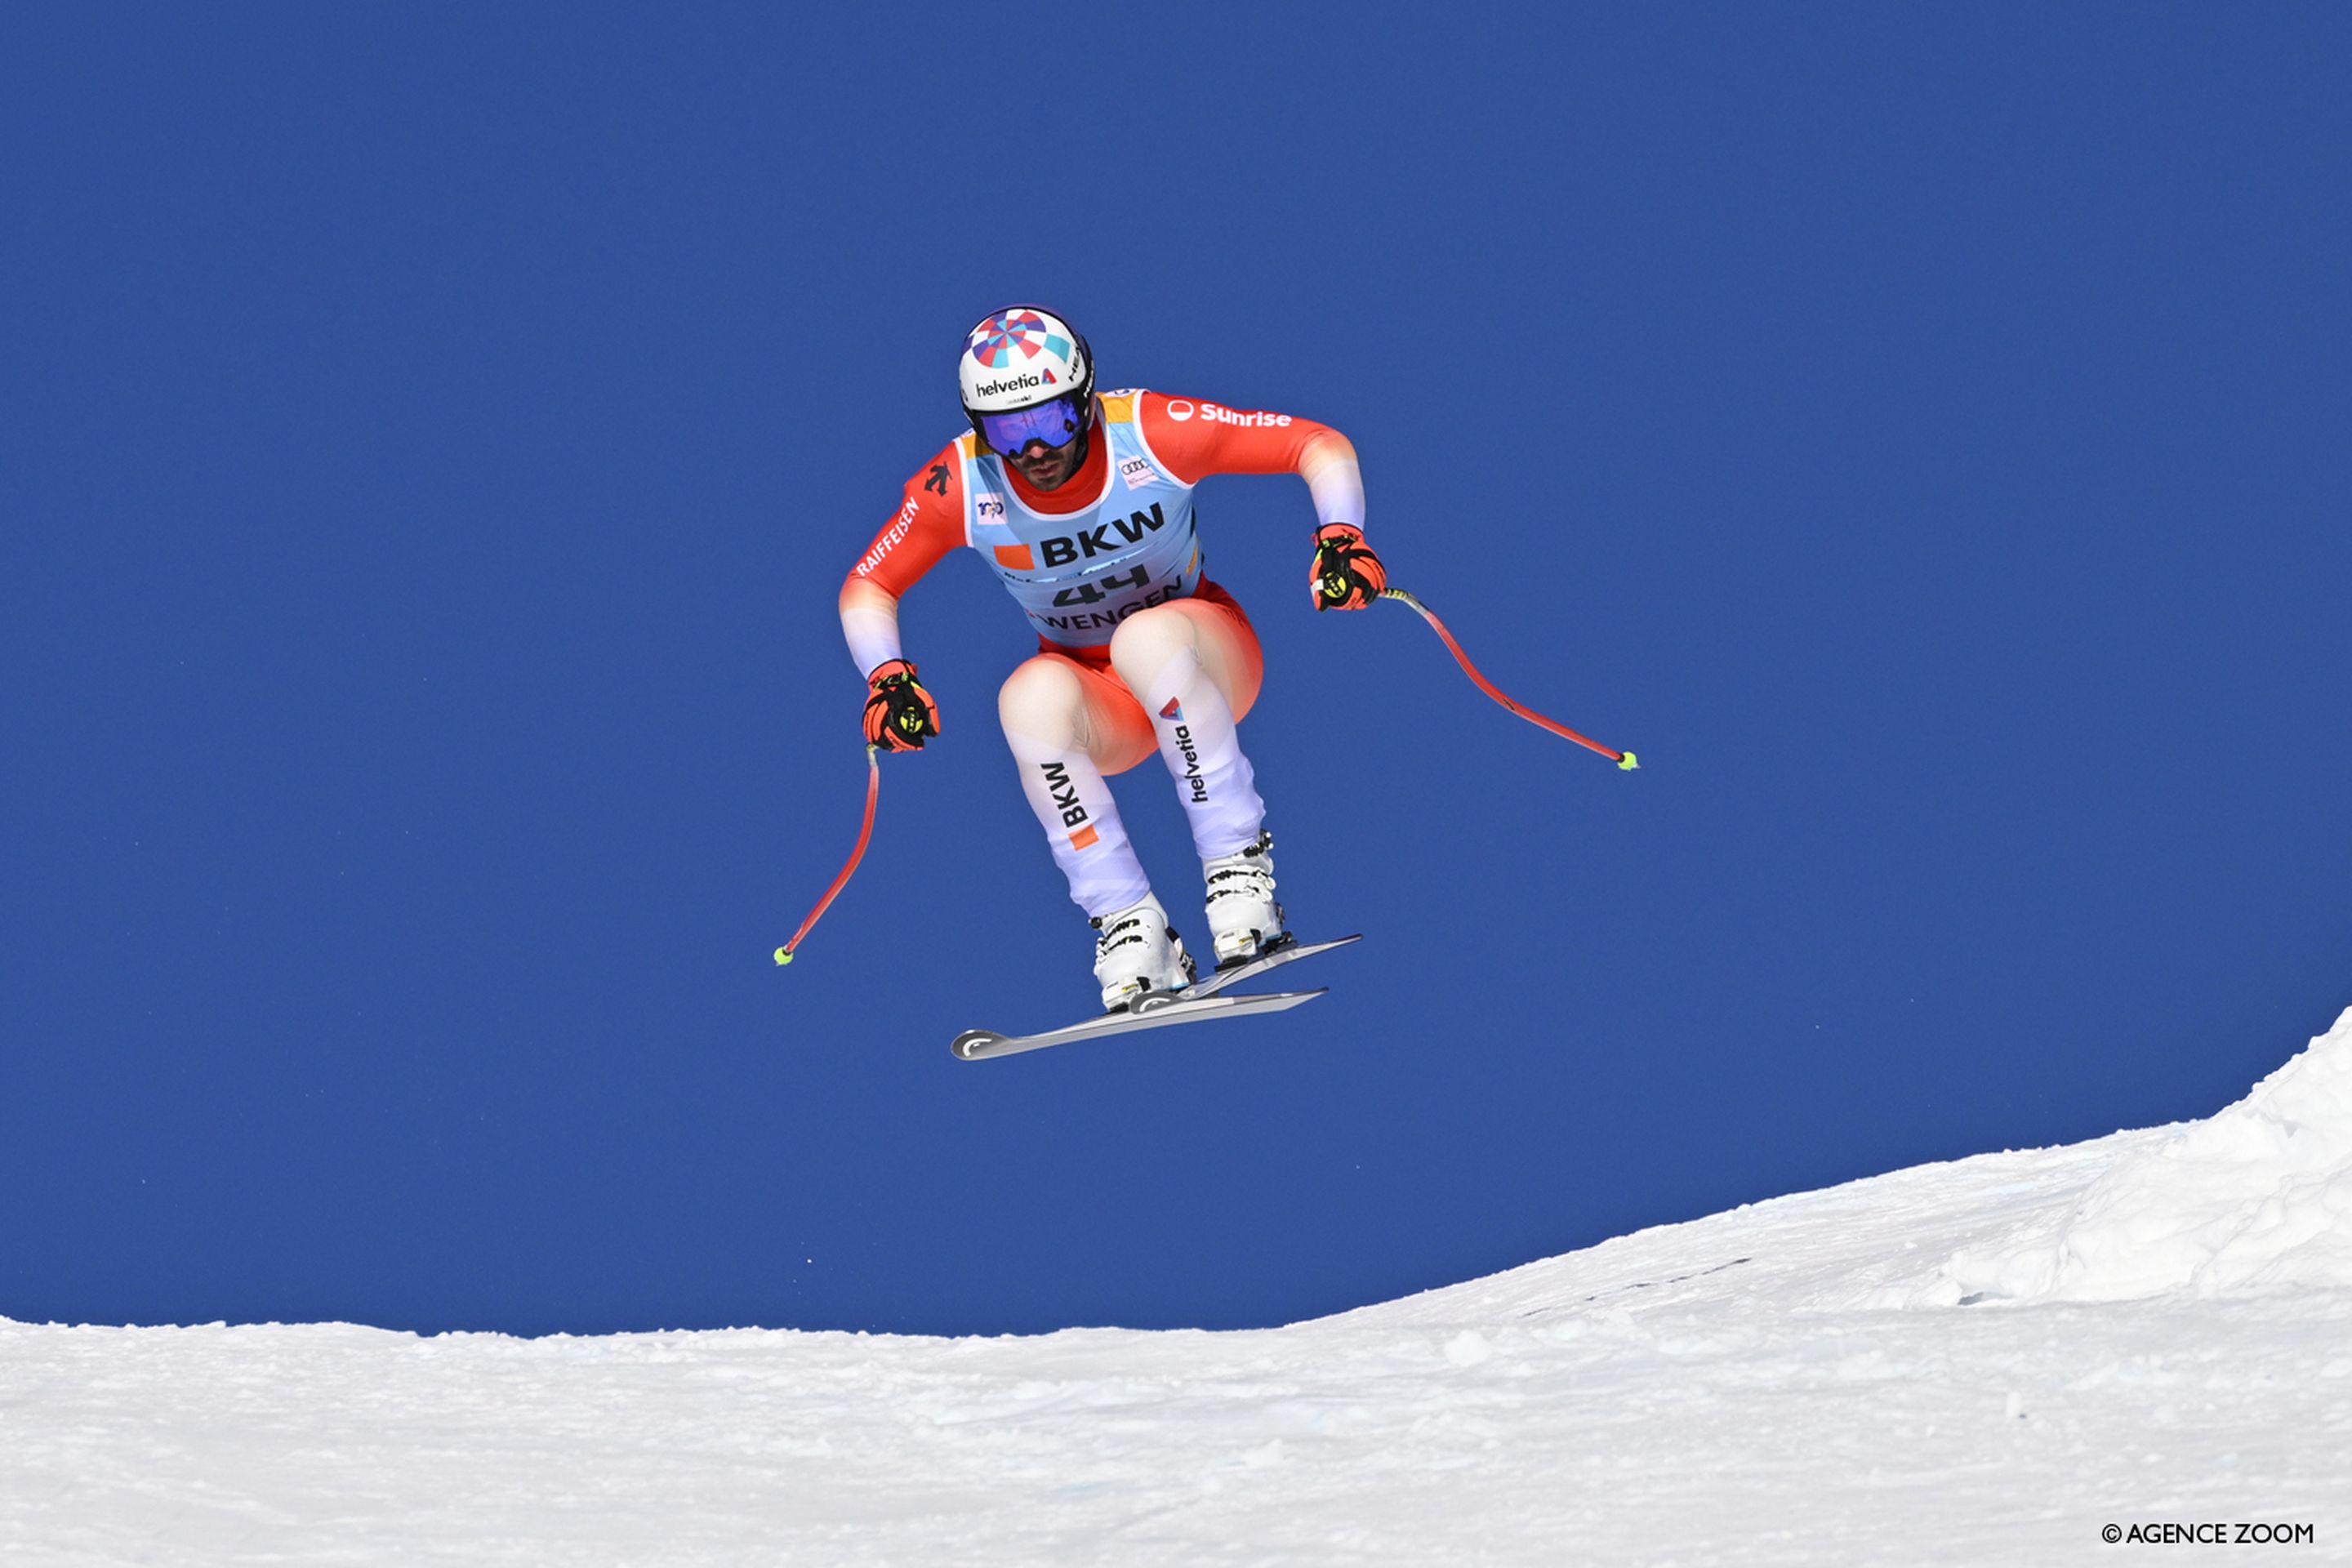 Gilles Roulin (SUI) flying through the air on home snow in Wengen